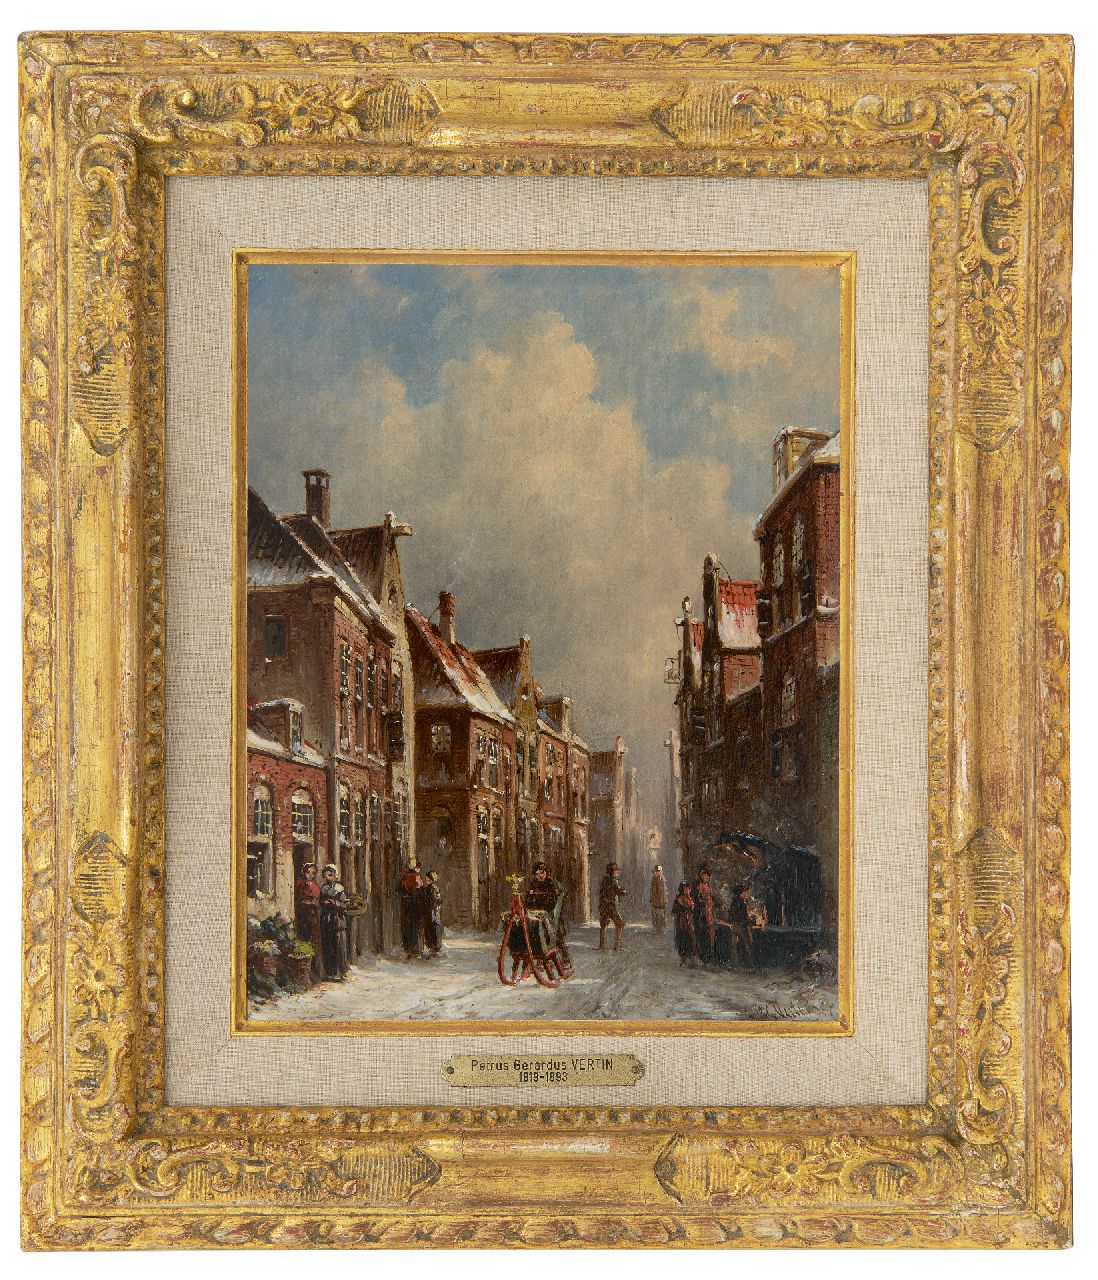 Vertin P.G.  | Petrus Gerardus Vertin | Paintings offered for sale | Village street in winter, oil on panel 24.1 x 19.0 cm, signed l.r. and dated '67